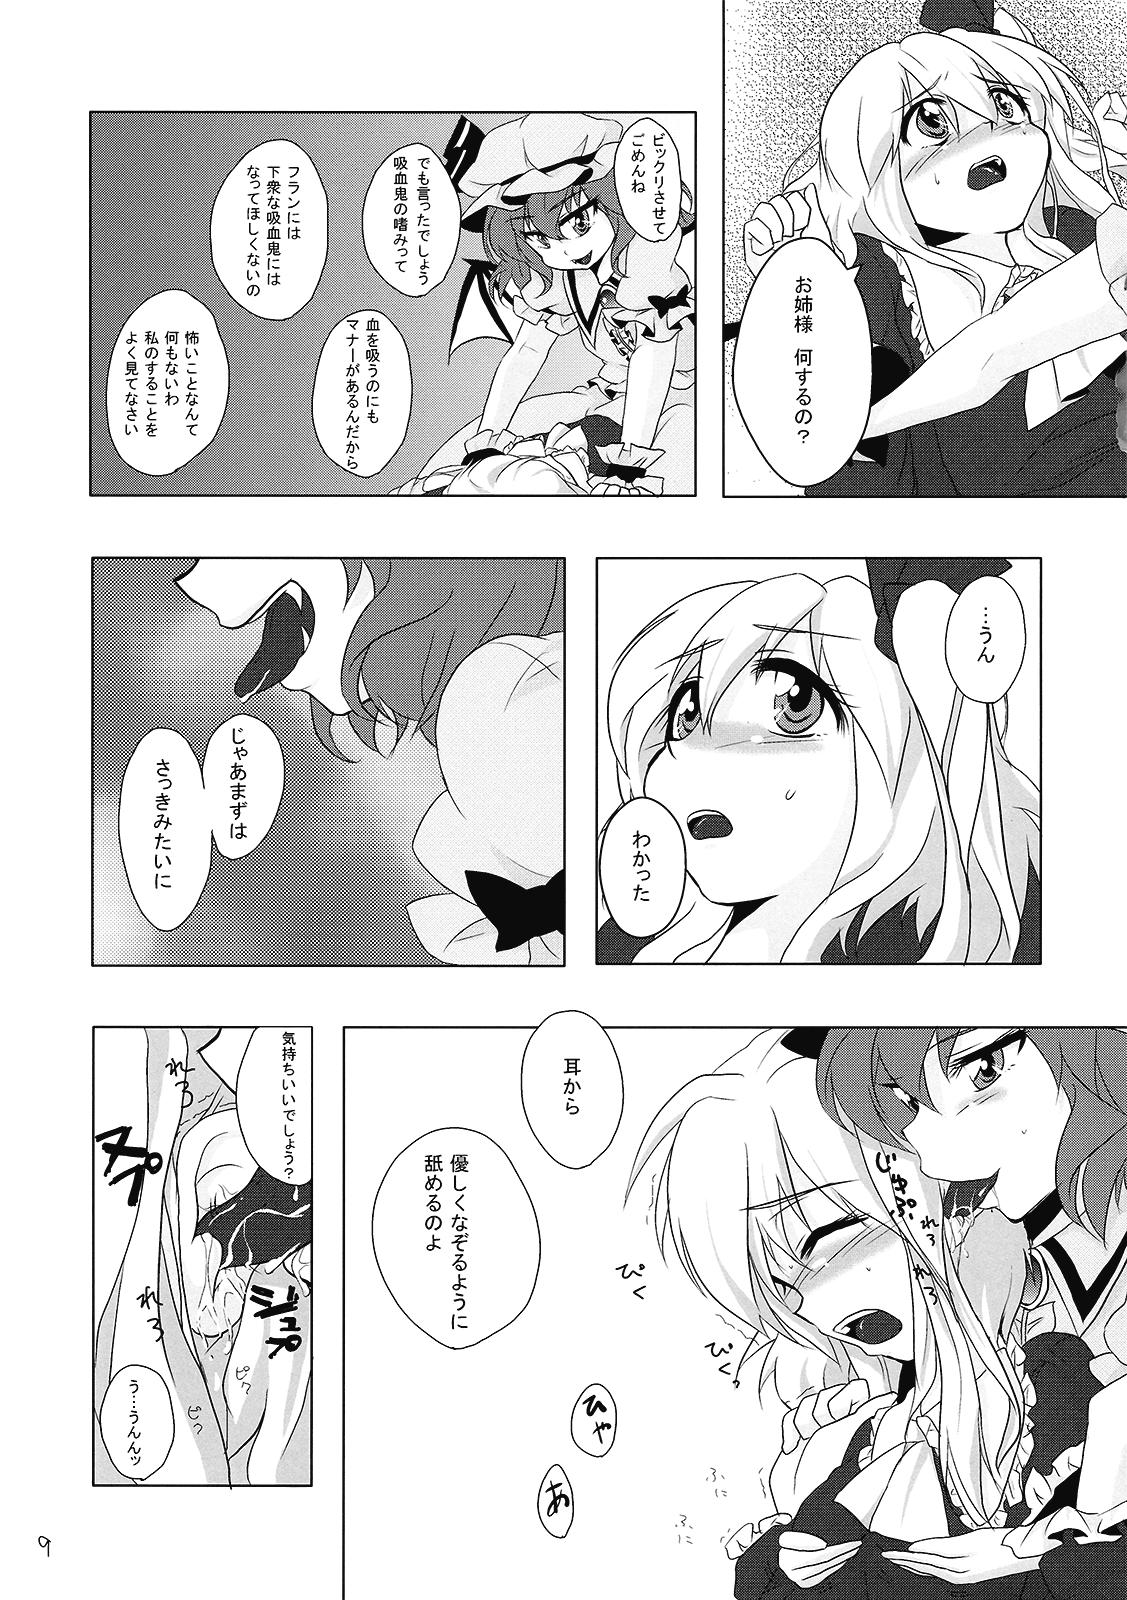 Ex Gf 吸血鬼のすゝめ - Touhou project Peruana - Page 11